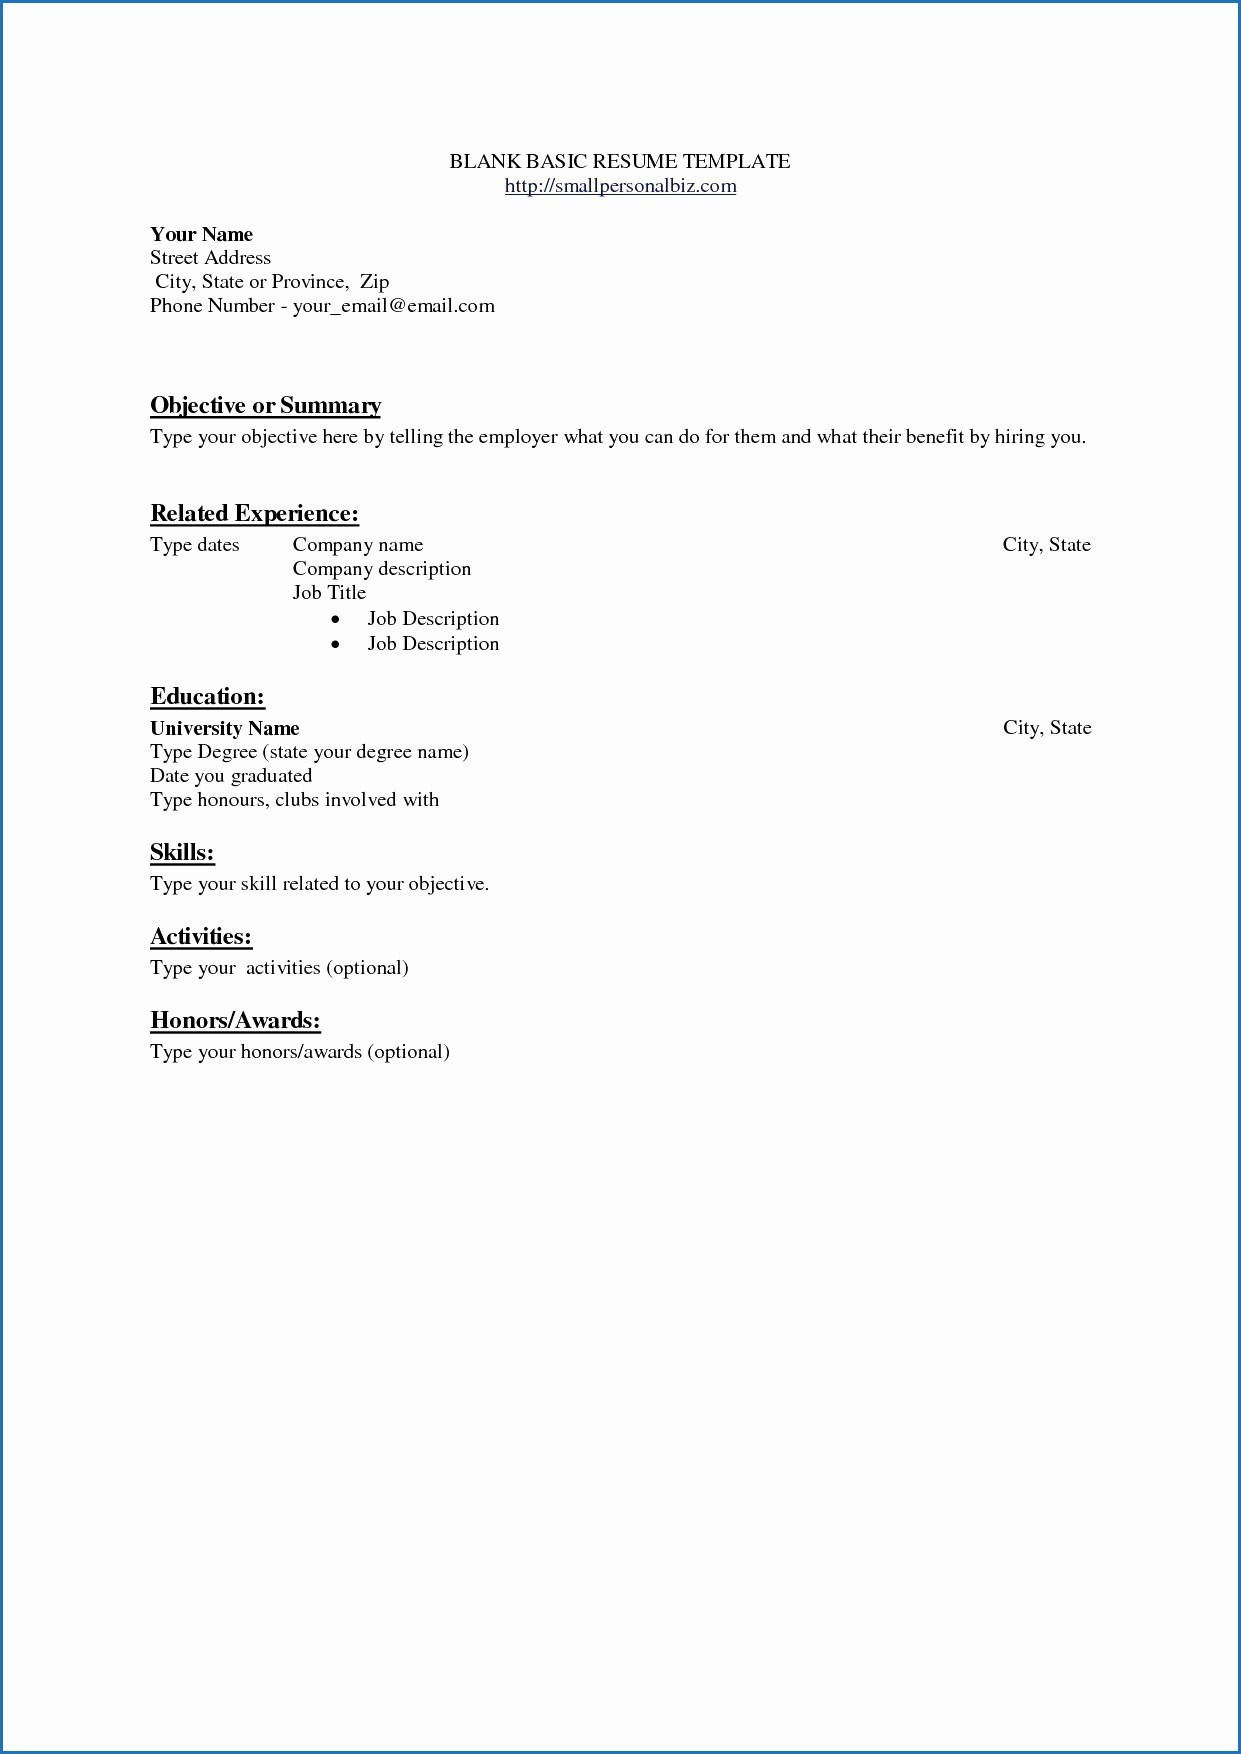 personal card template awesome best resume templates professional unique skills to put resume best of personal card template